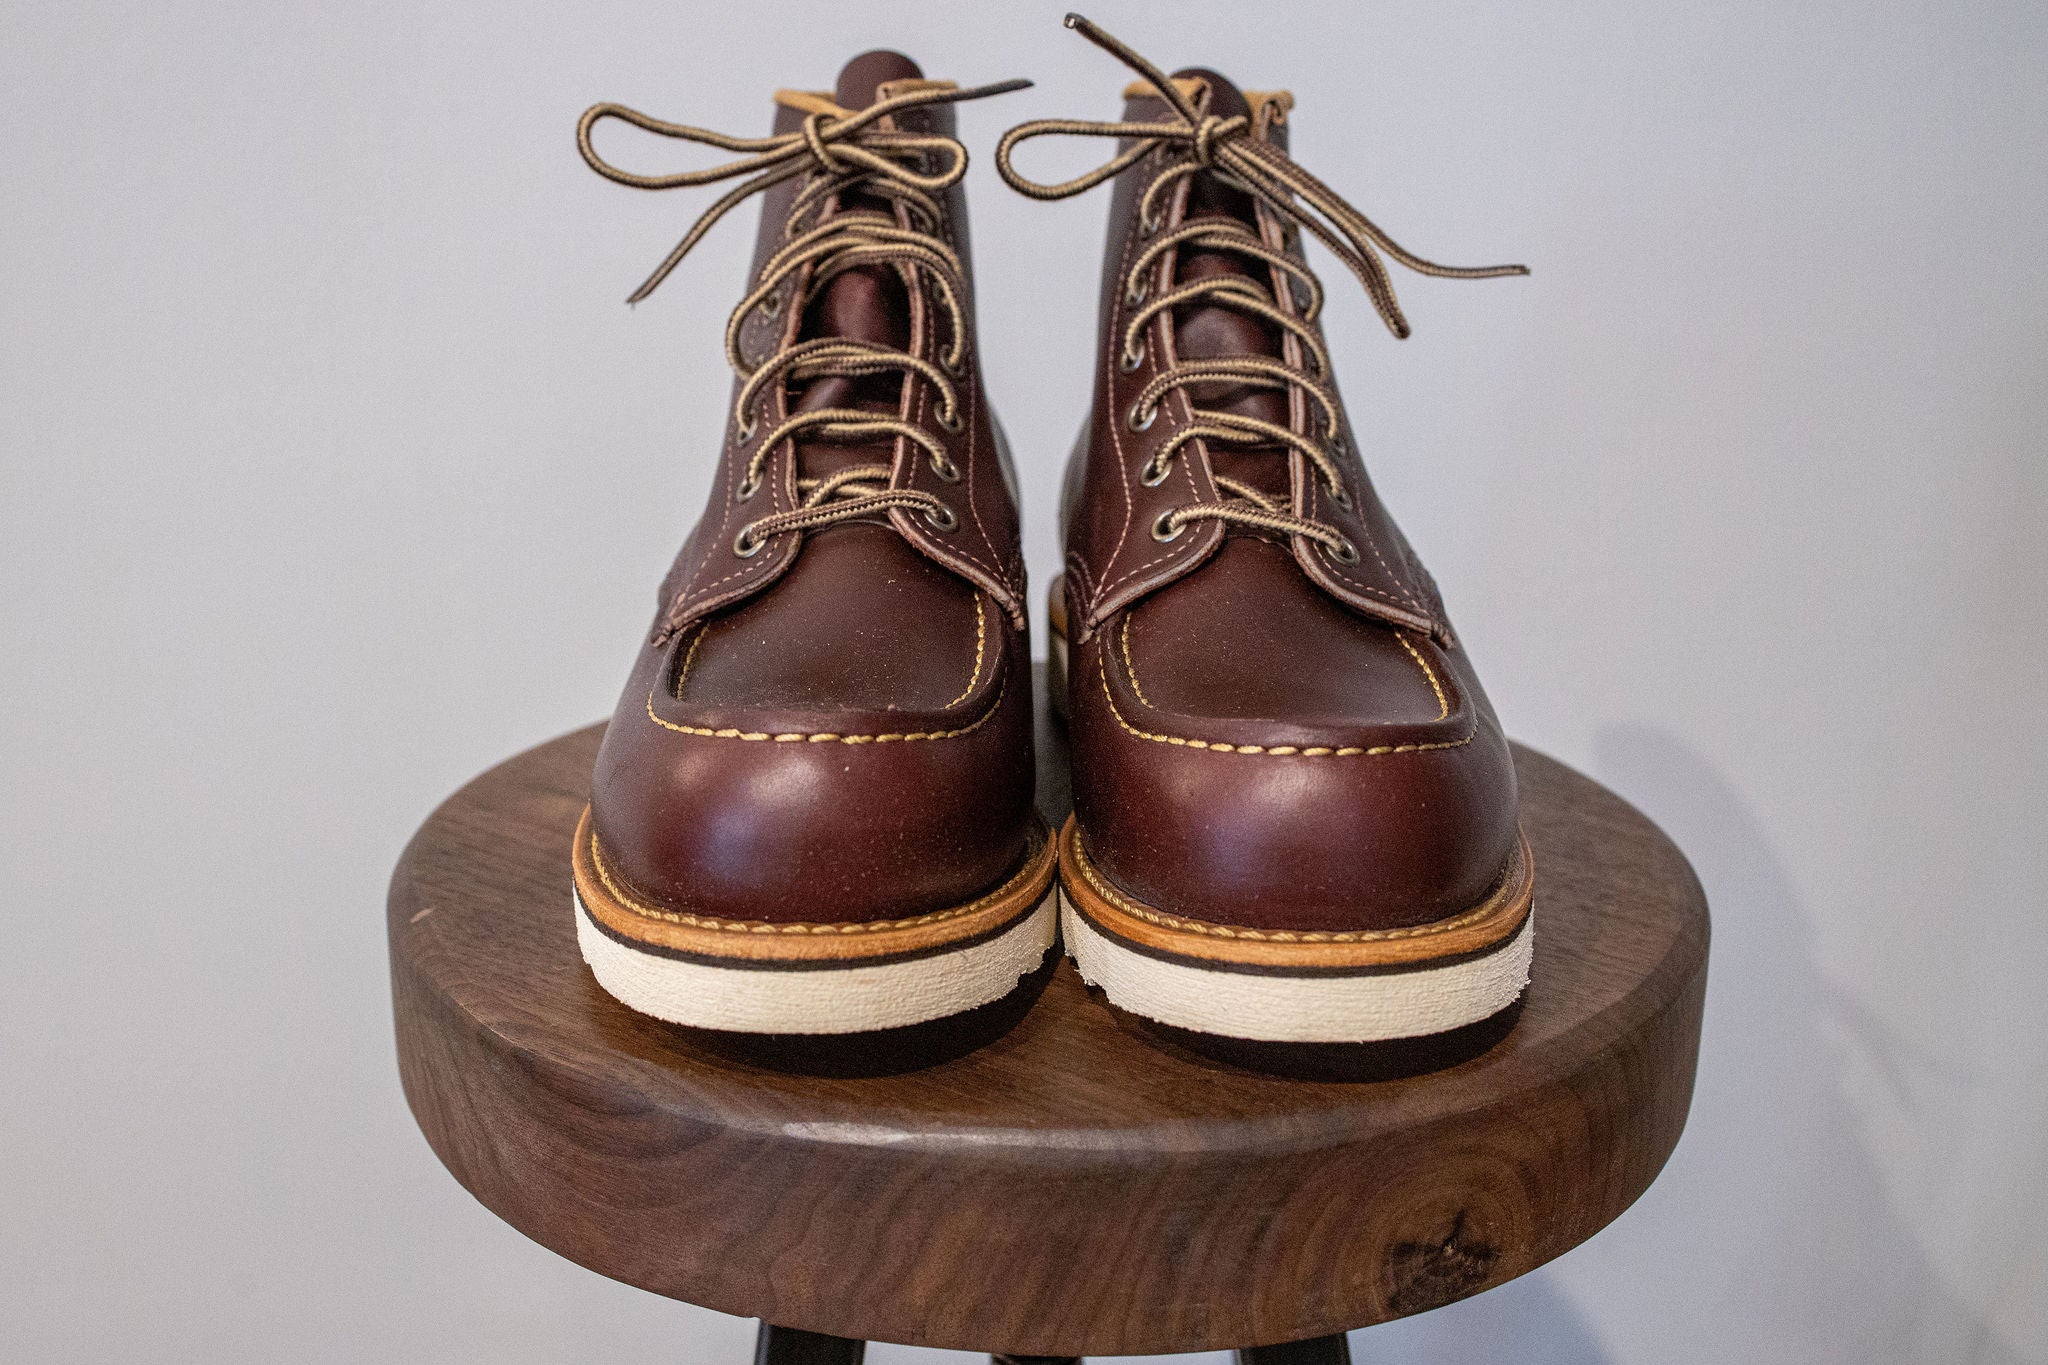 red wing heritage 6 moc toe